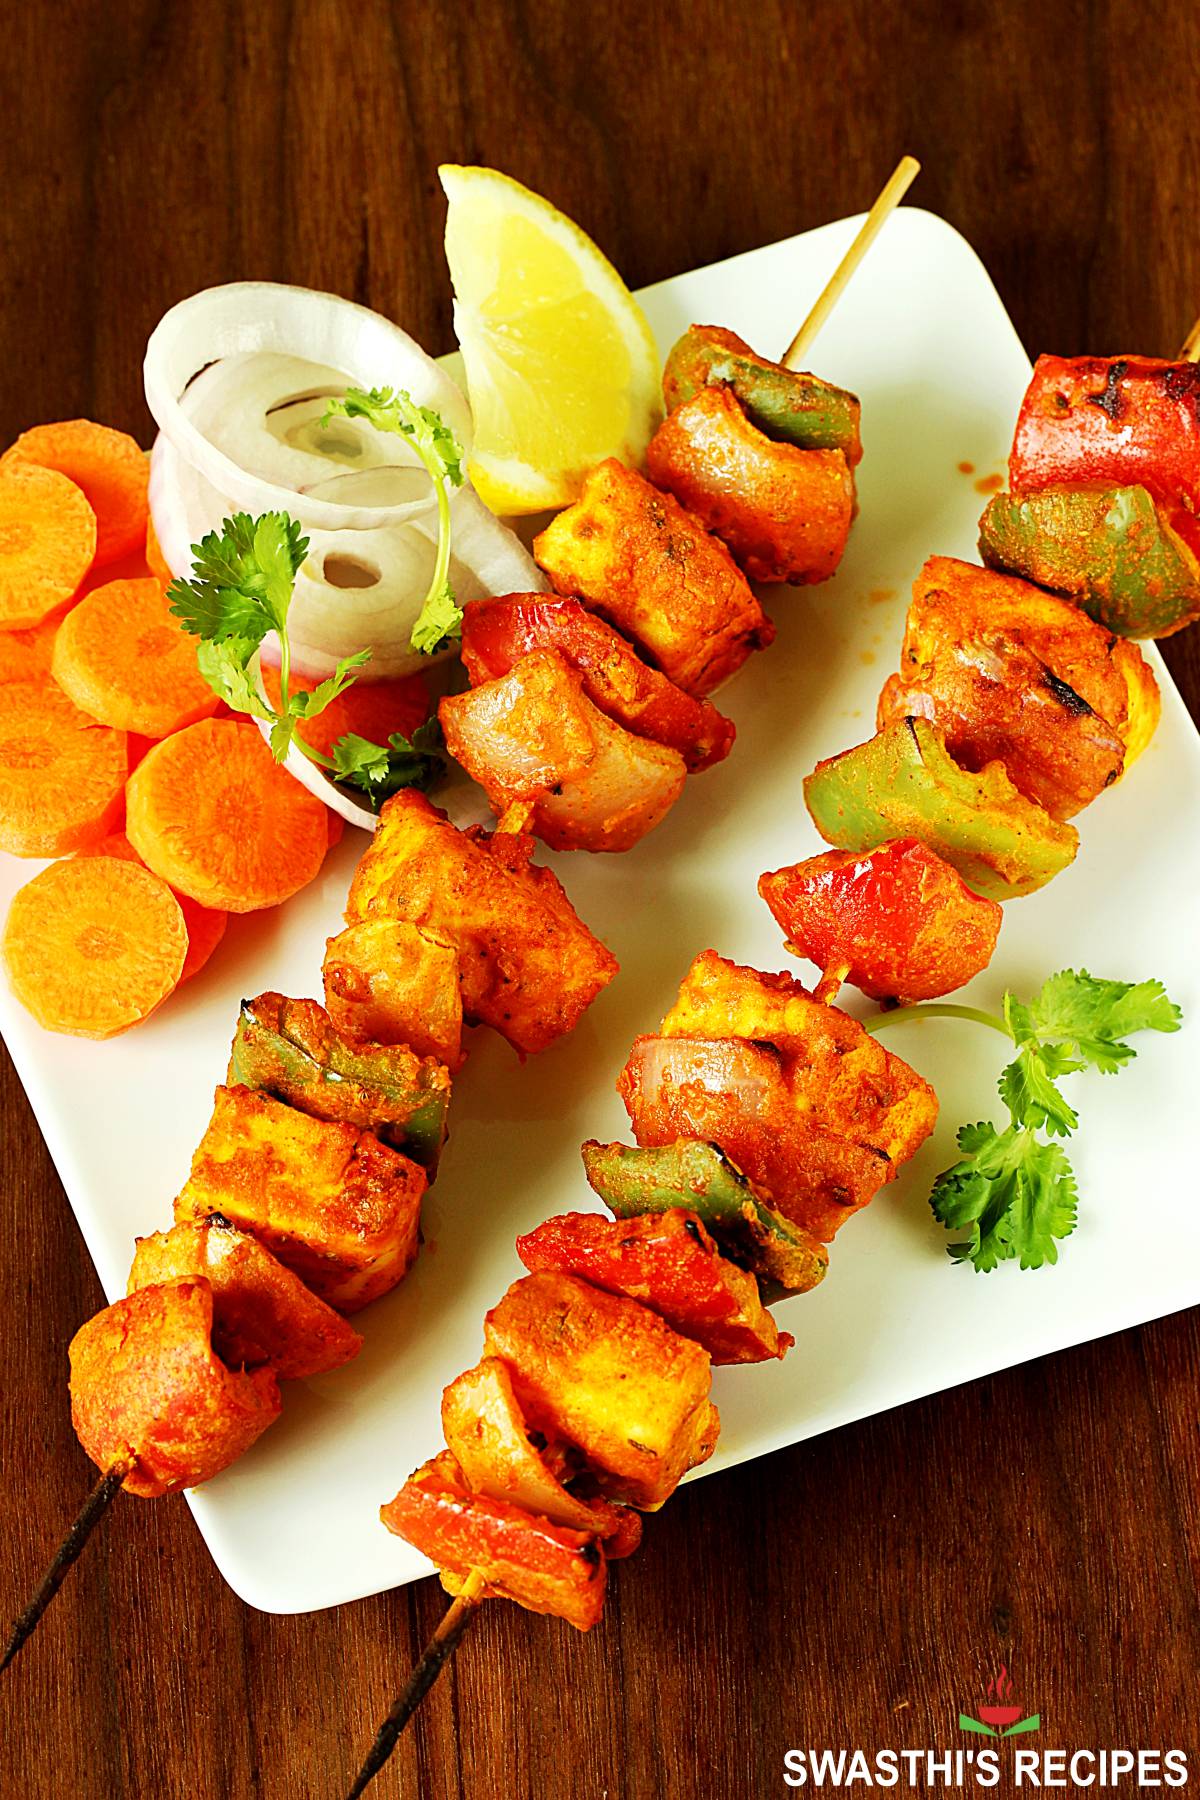 Paneer Tikka Recipe: Deliciously Spiced Grilled Cottage Cheese